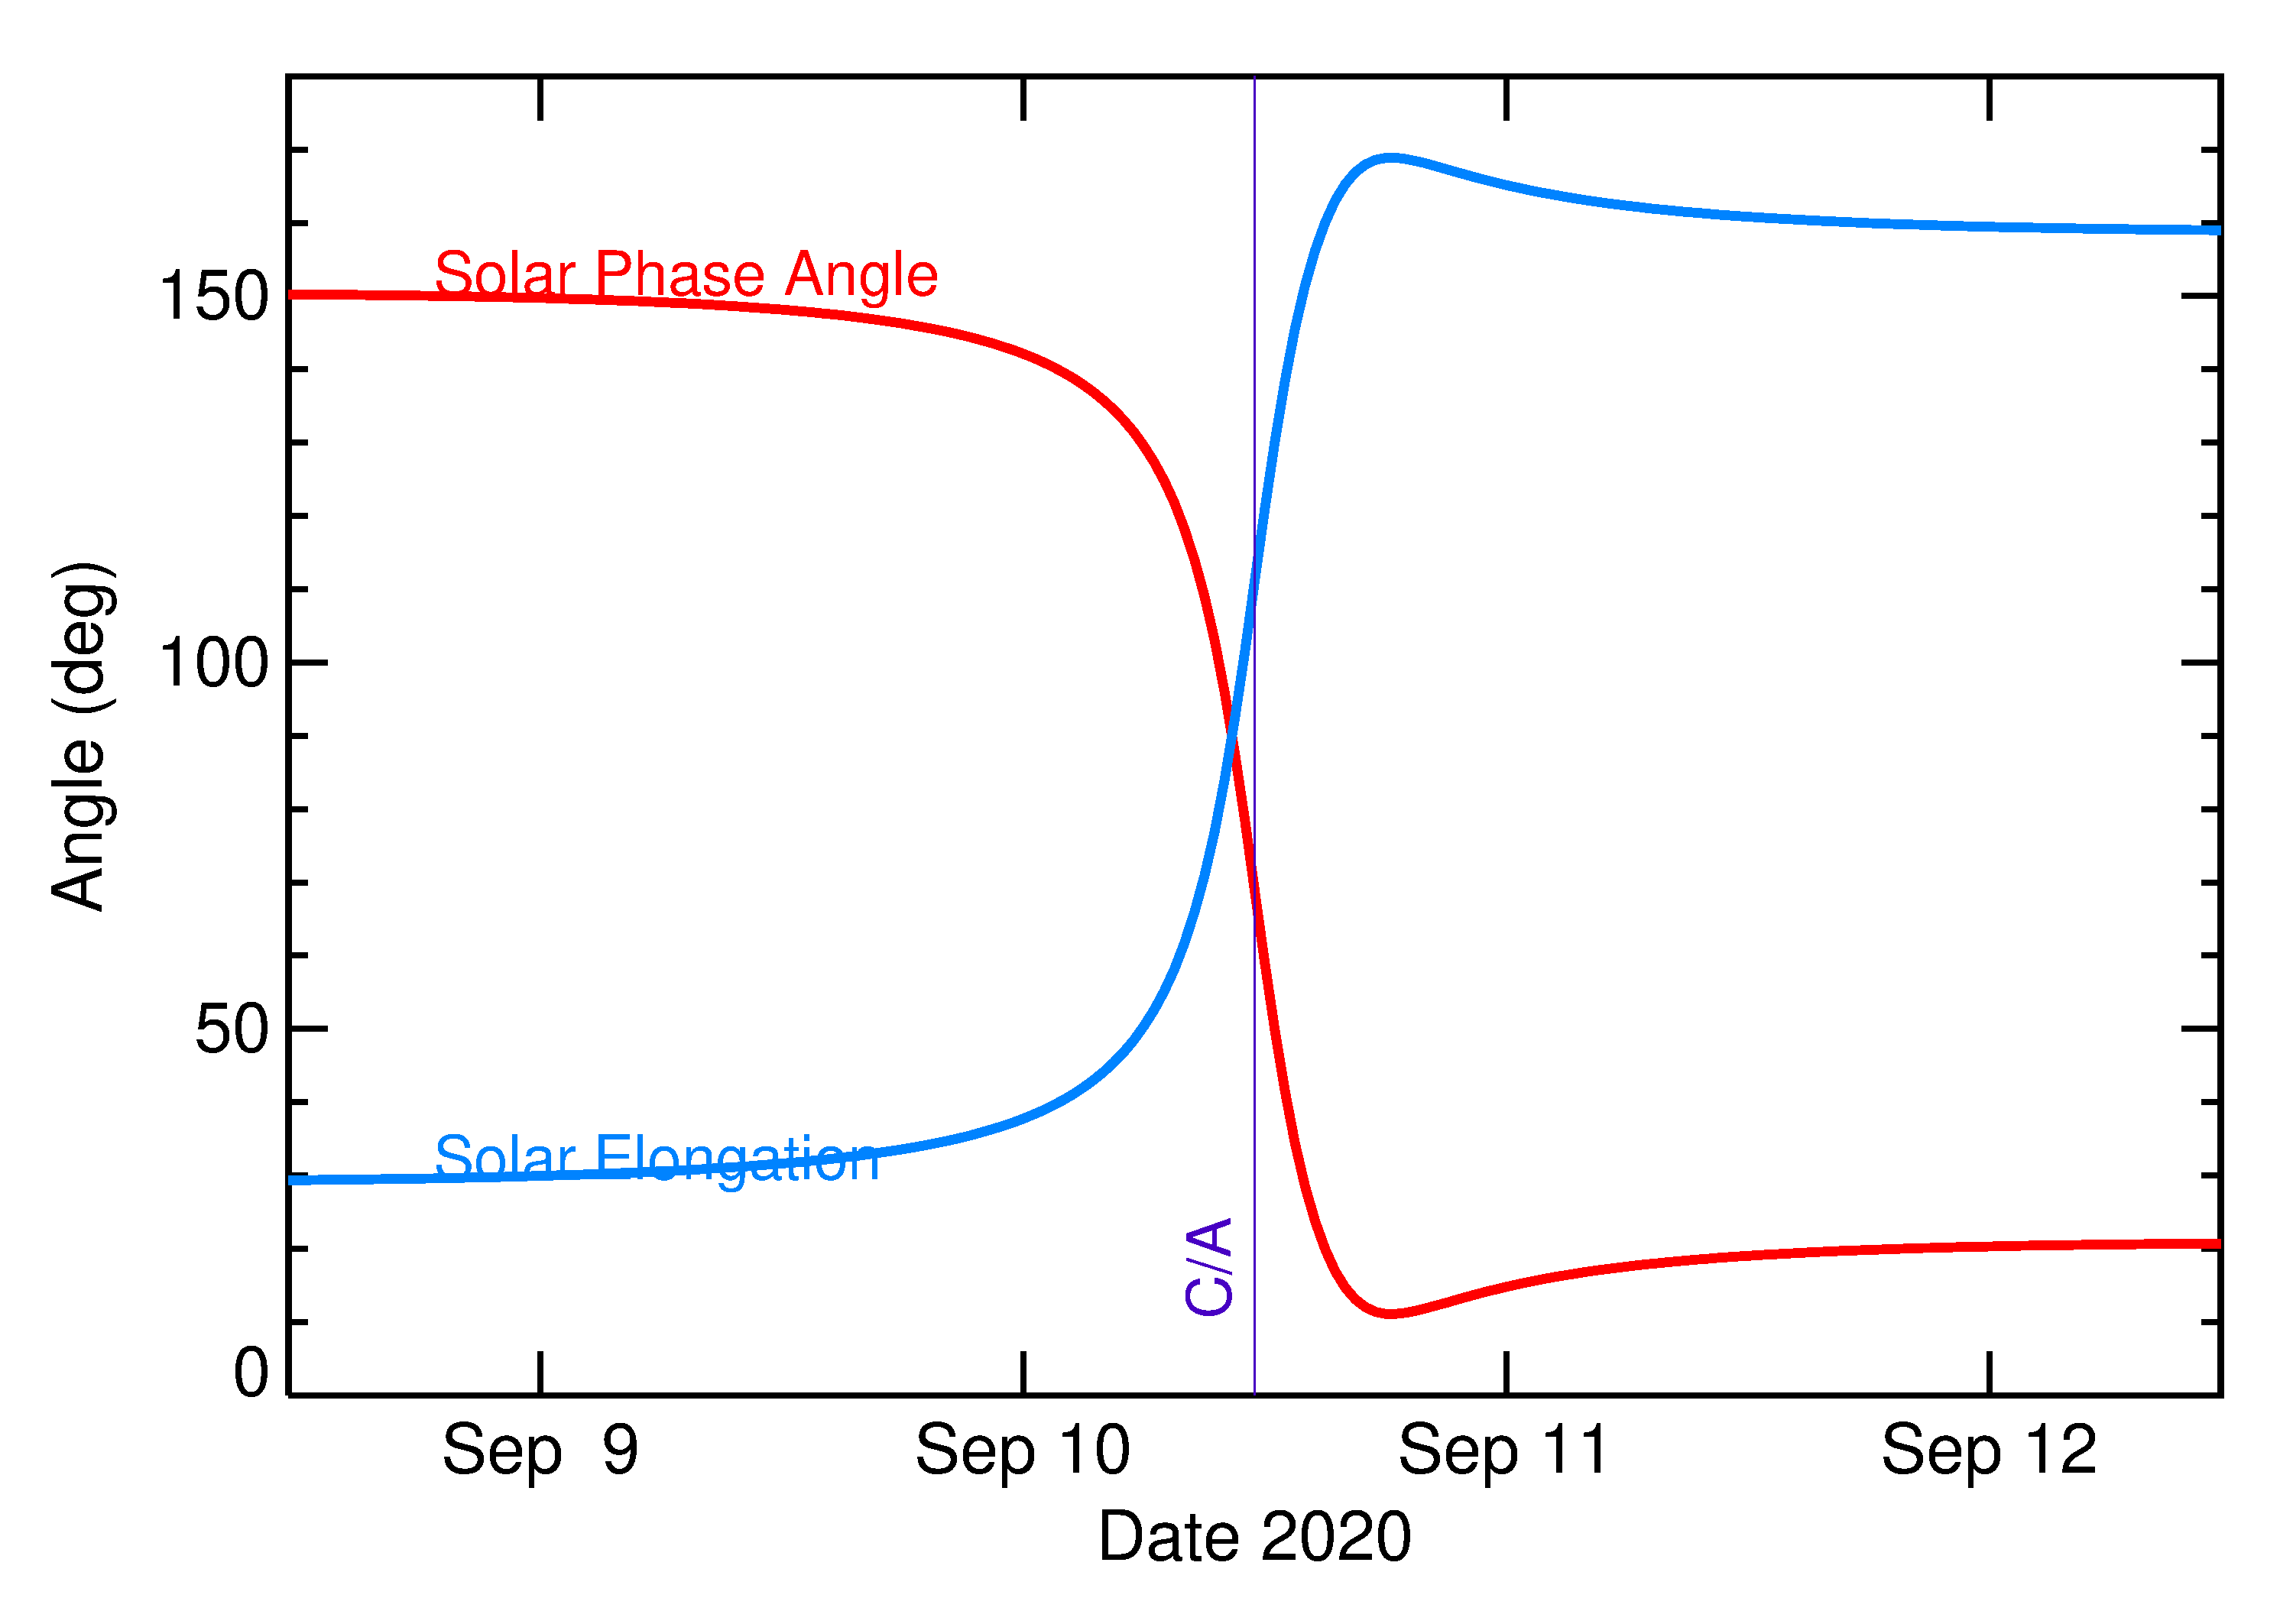 Solar Elongation and Solar Phase Angle of 2020 RG10 in the days around closest approach